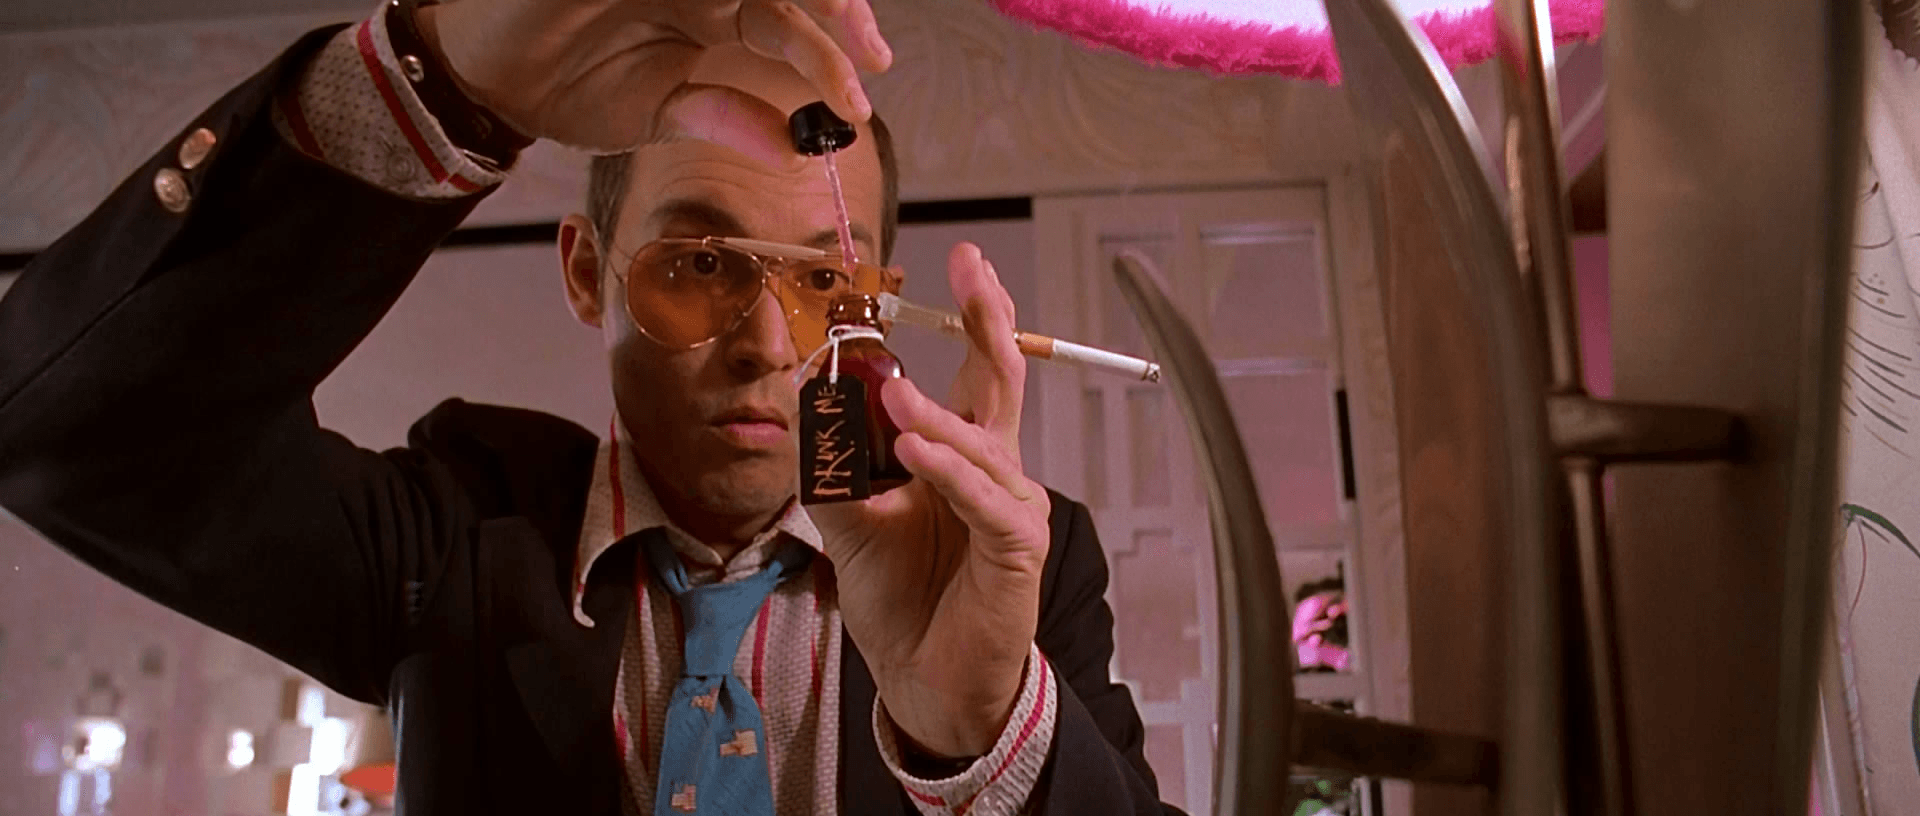 Fear and Loathing in Las Vegas (1998) by Terry Gilliam